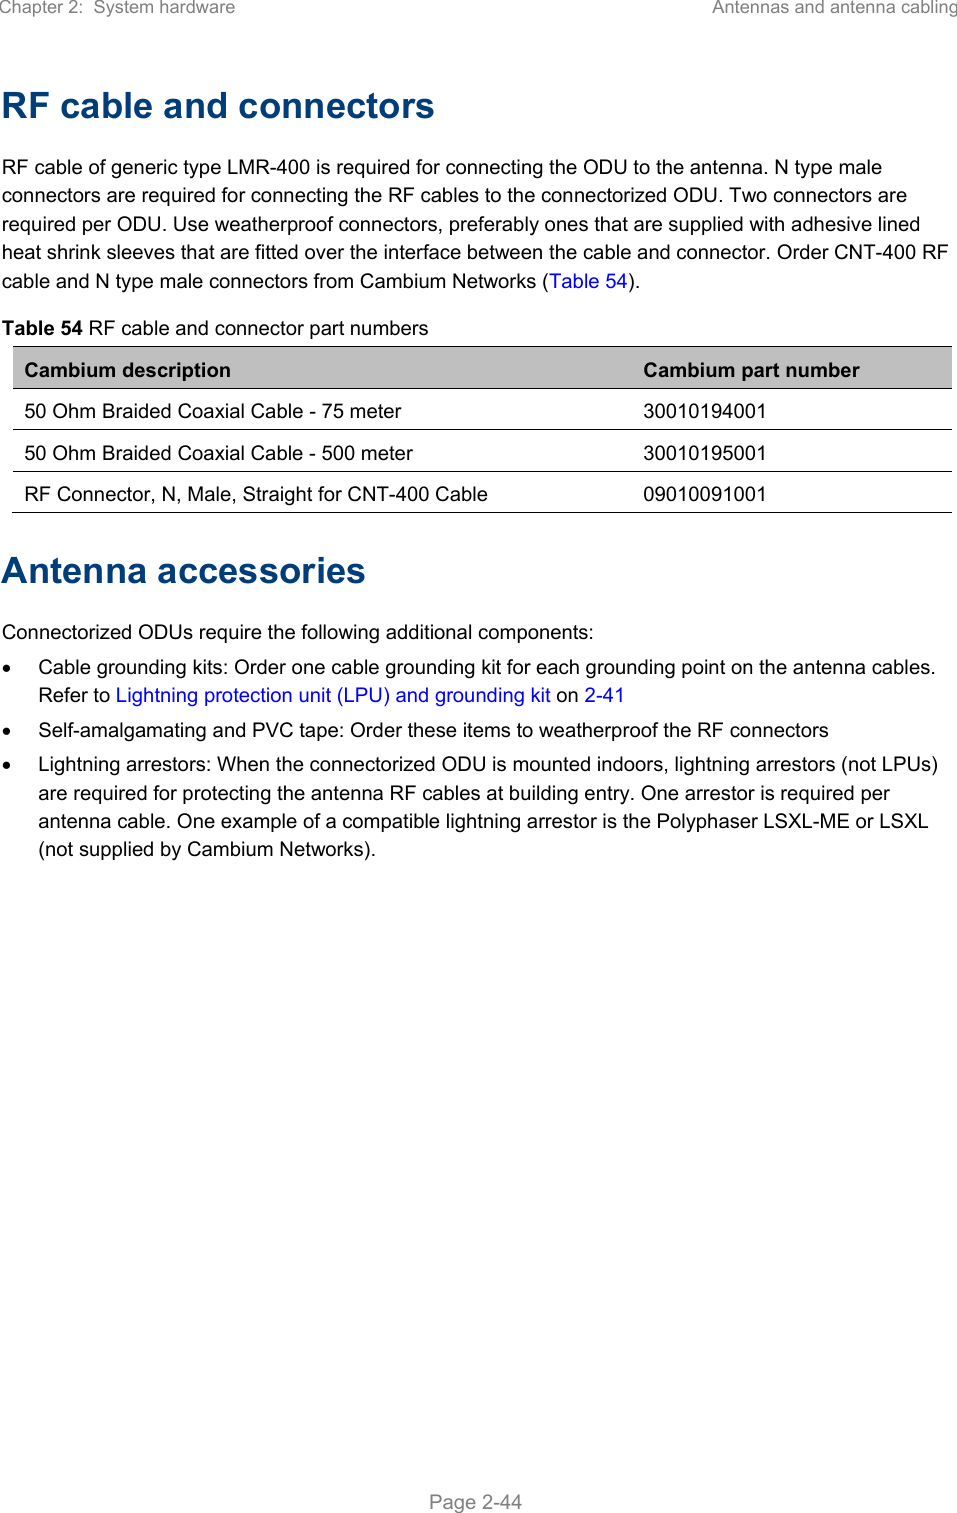 Page 108 of Cambium Networks 50450M 5GHz Point to MultiPoint Multi User MIMO Access Point User Manual PART1